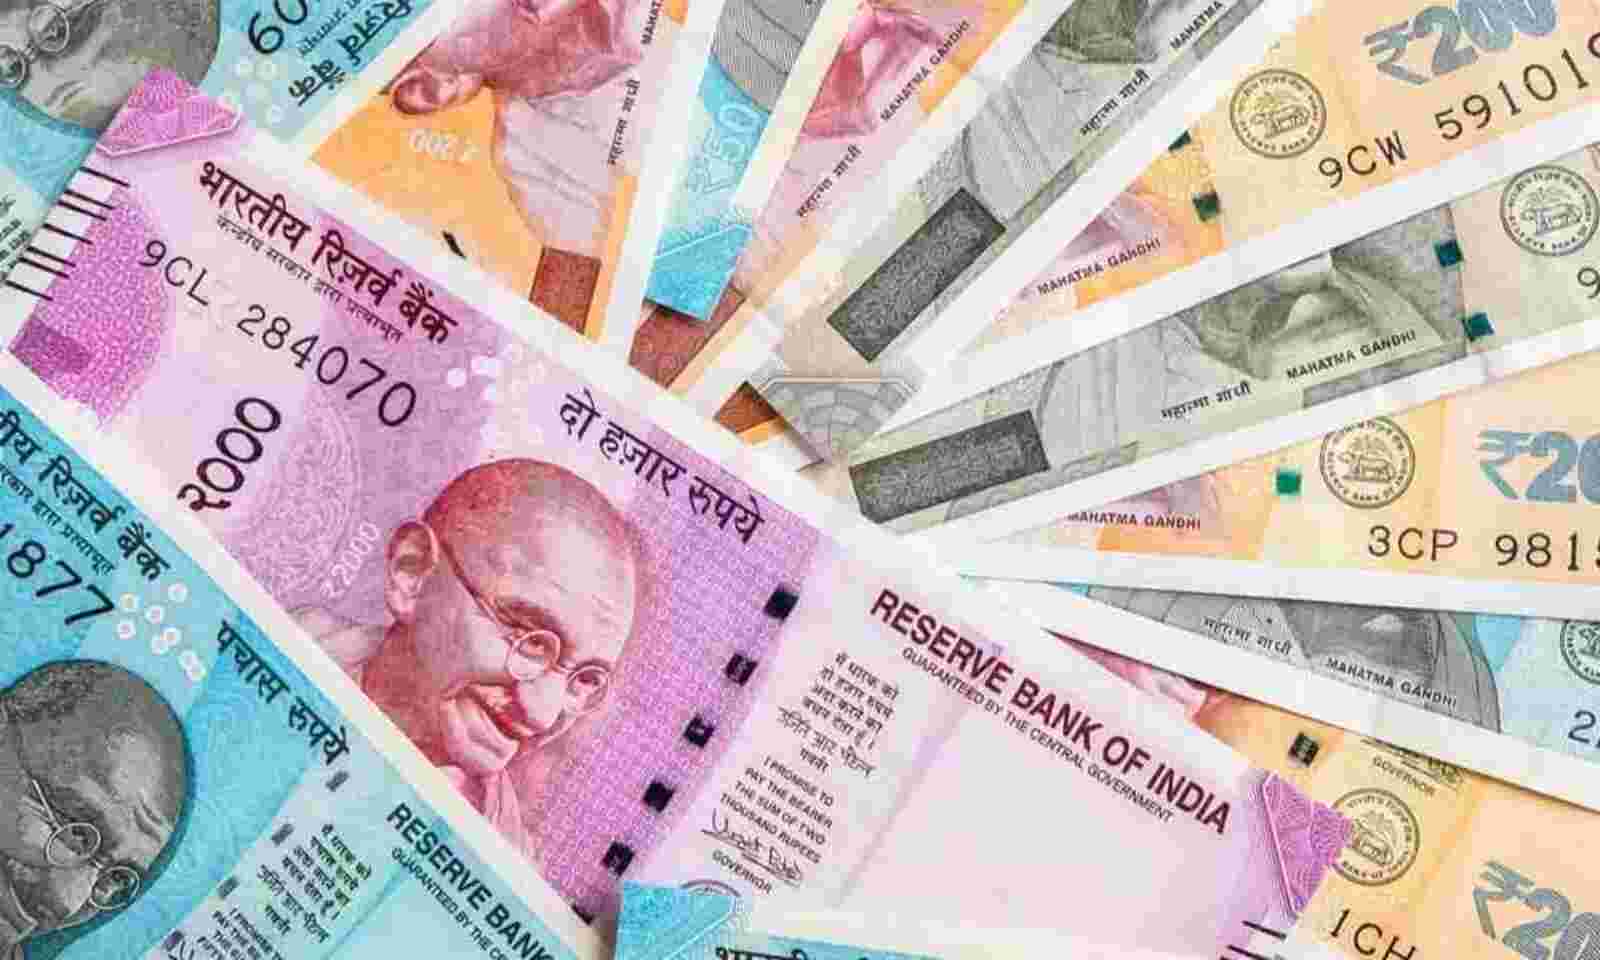 Modi’s demonetization scheme is approved by the Indian Supreme Court, raising concerns in Nepal